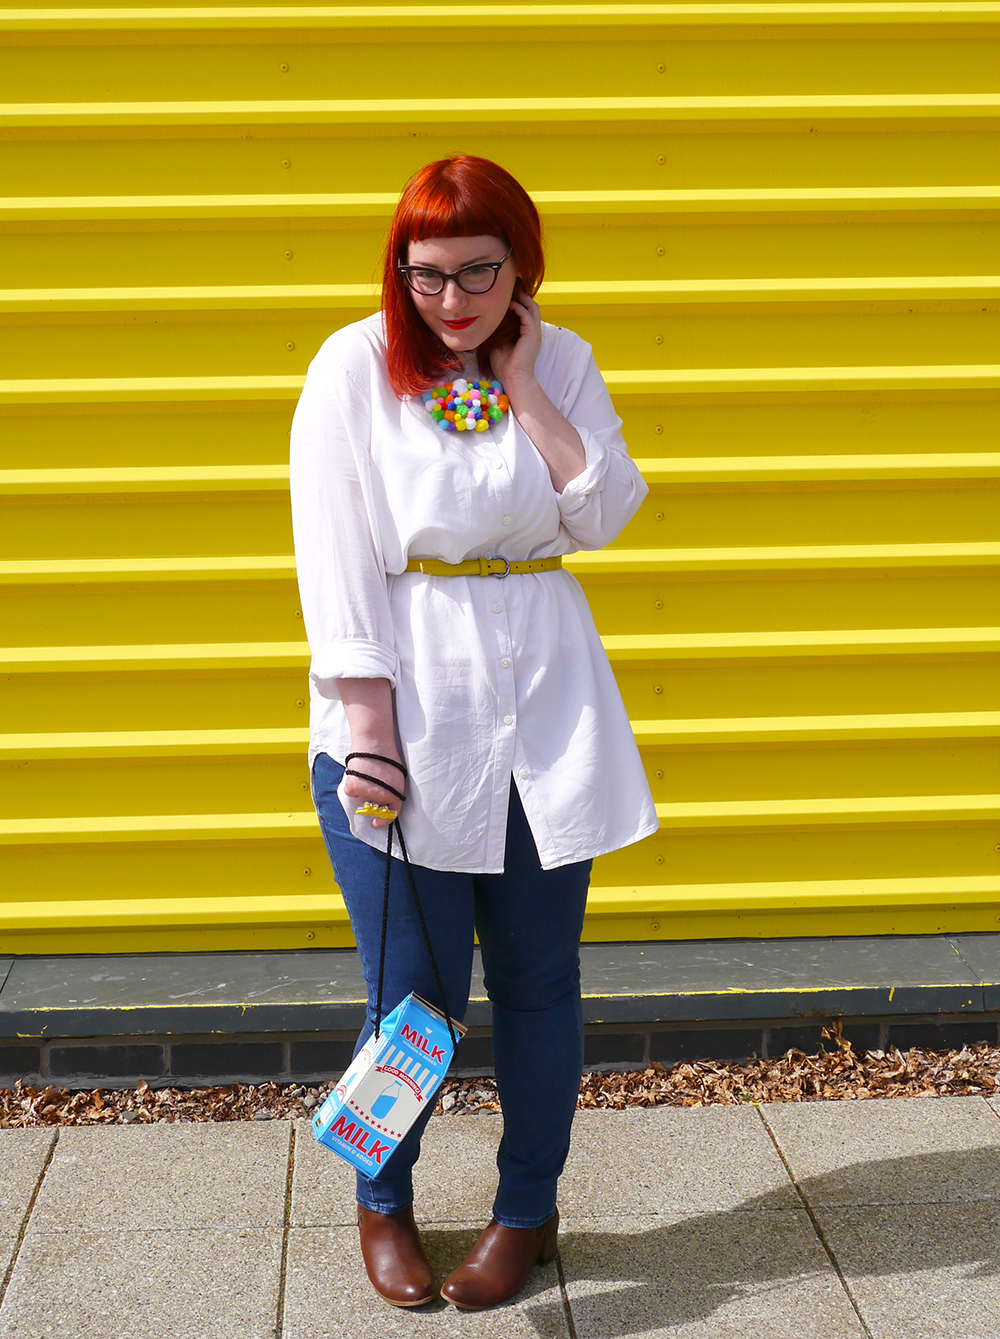 Style dby Helen, Scottish Blogger, red hair, ginger style, cat eye glasses, Dundee blogger, Dundee style, Monki shirt, simple white shirt, blue jeans style, topshop jean, yellow belt. skinny belt, belted shirt, milk bag, novelty bag, Skinnydip London bag, Zara brown boots, brown boots, chelsea boots, pom pom necklace, statement necklace, DIY necklace, handmade style, colourful style, colourful outfit, colourful street style, bright ootd